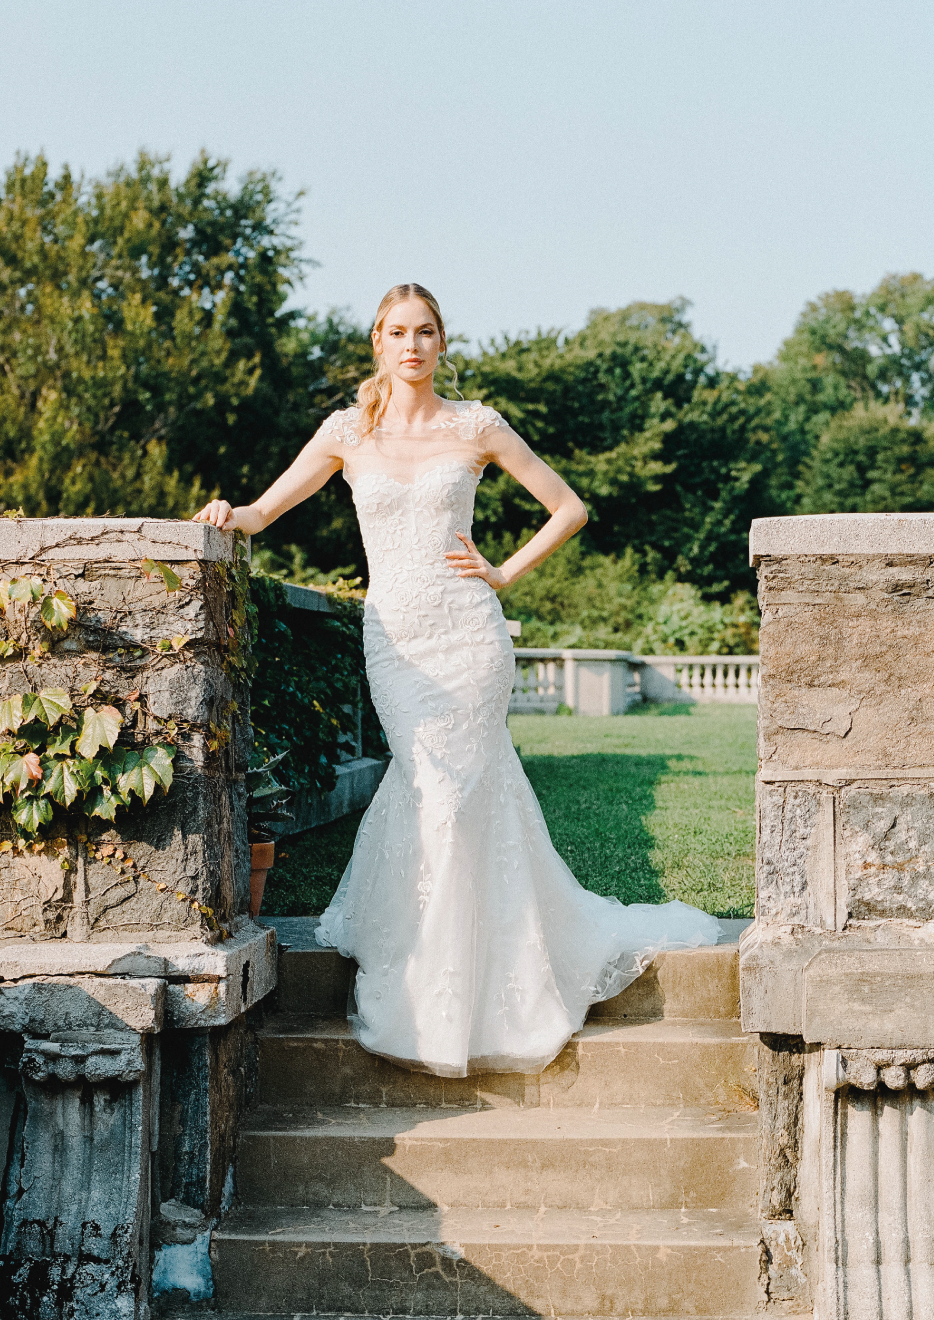 Wedding dress model Emma - Dress in Strapless style with bustier, trumpet skirt gown with chapel train - Verdin New York